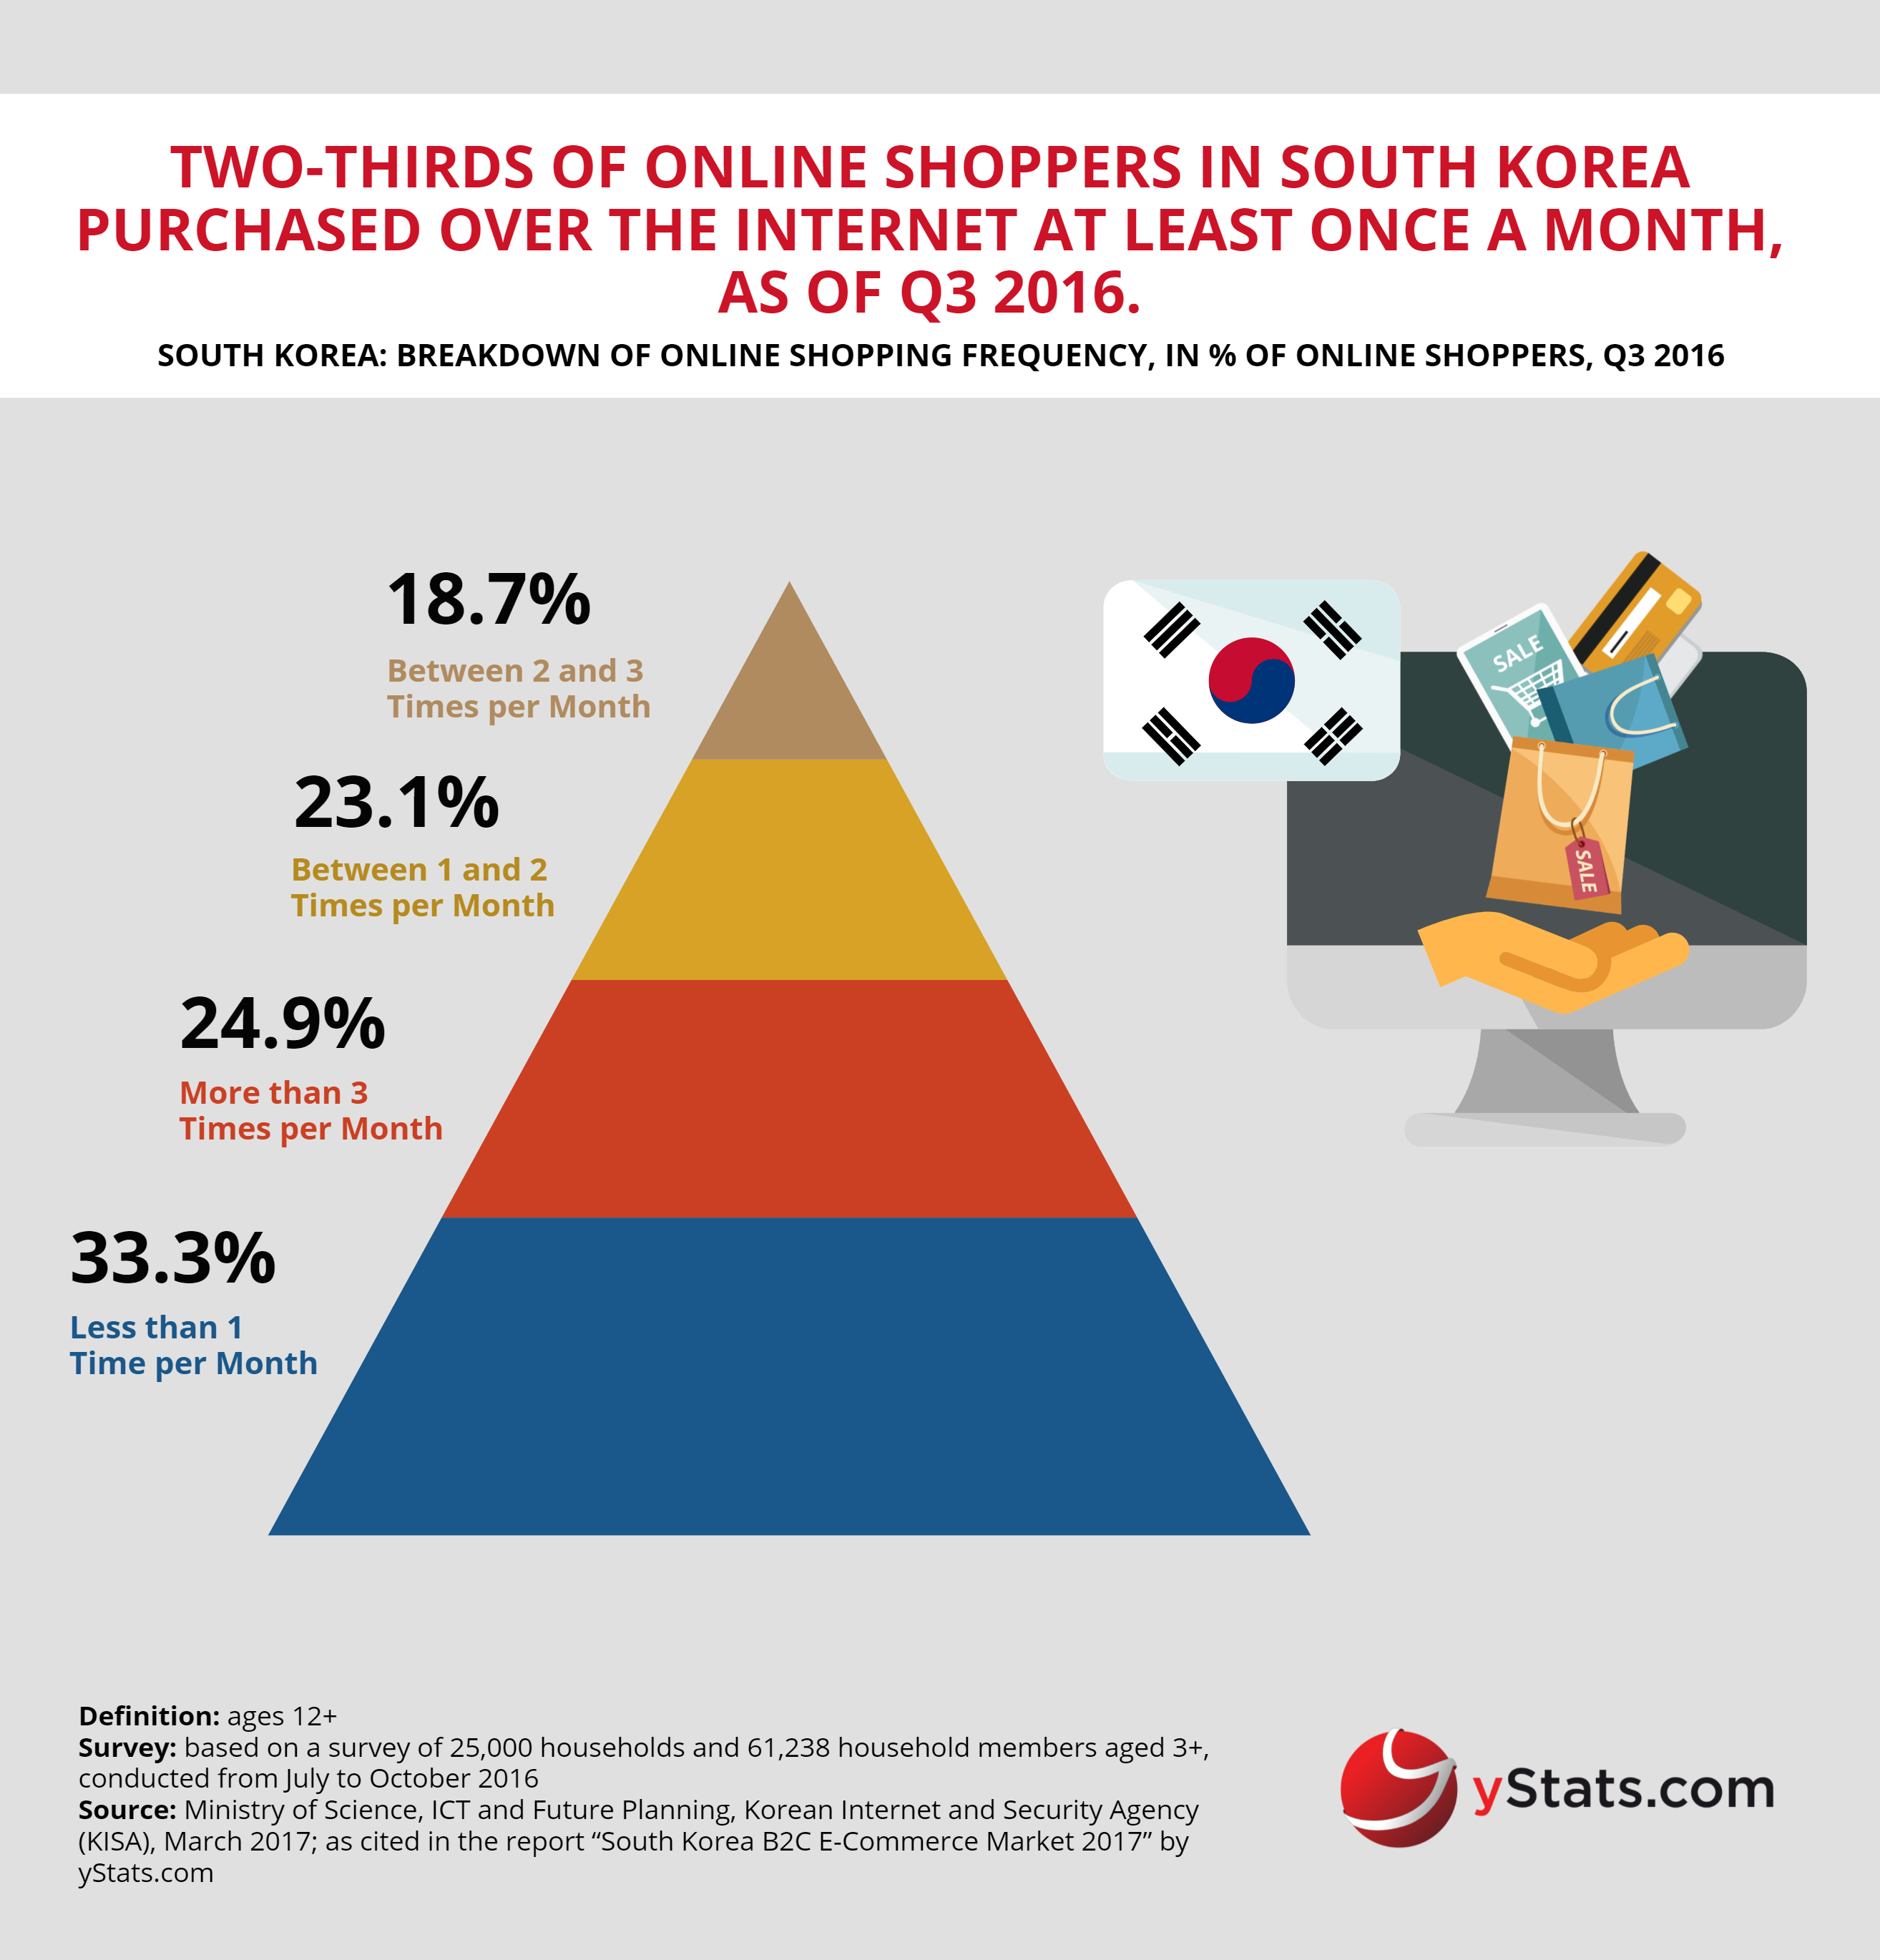 online shopping frequency in south korea